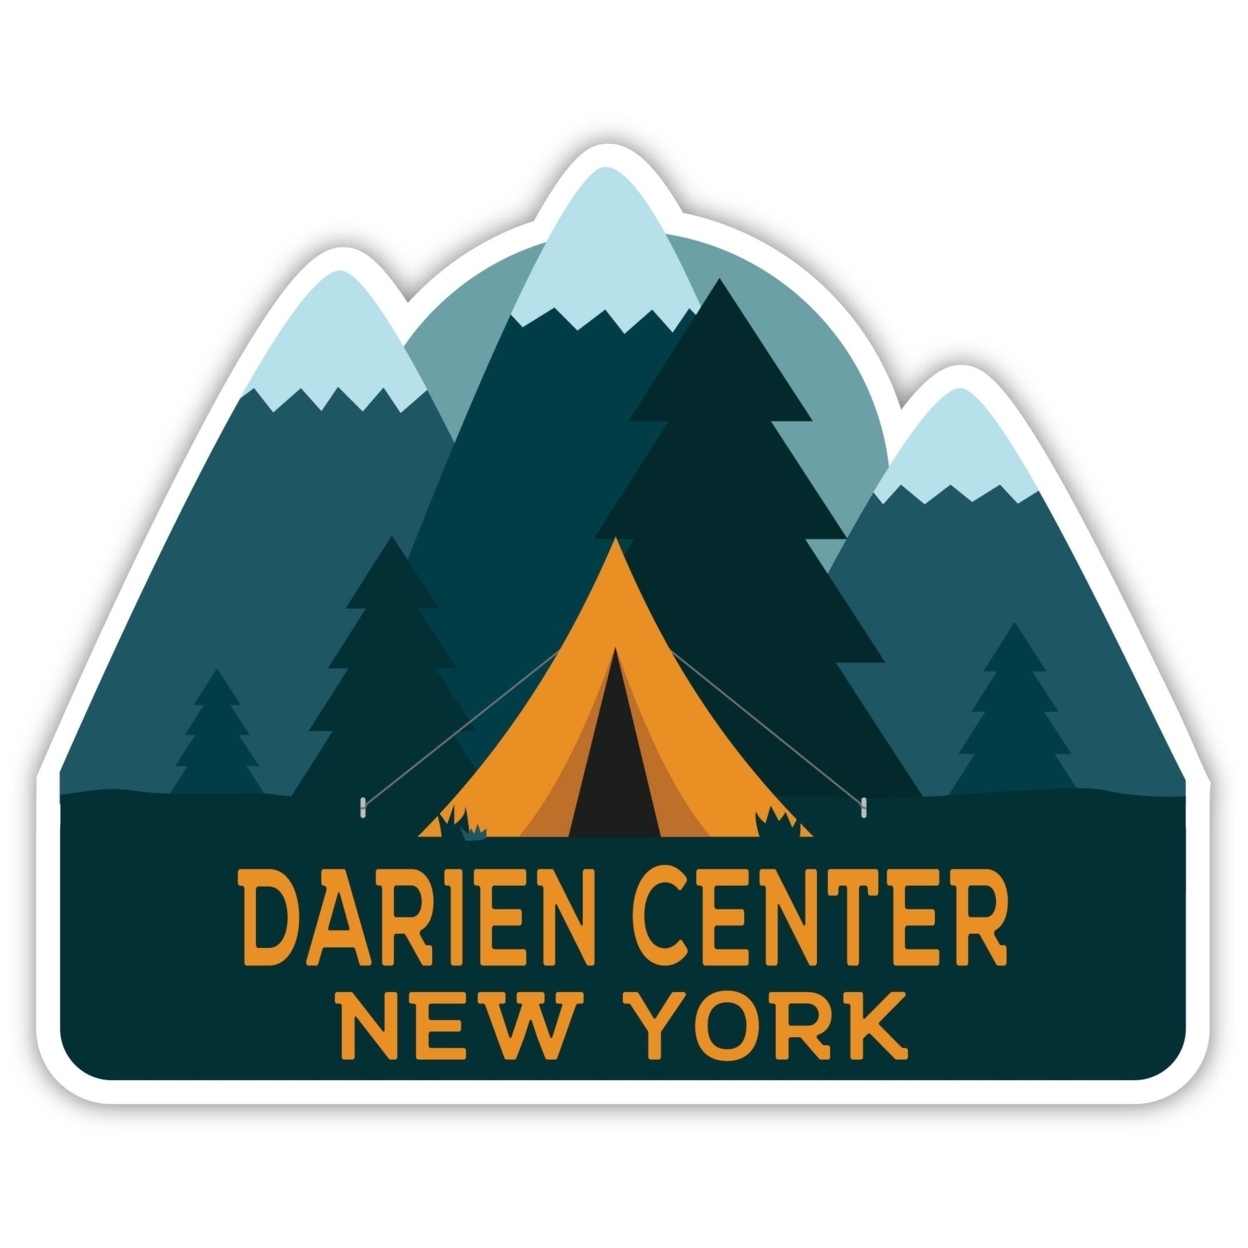 Darien Center New York Souvenir Decorative Stickers (Choose Theme And Size) - 4-Pack, 4-Inch, Tent